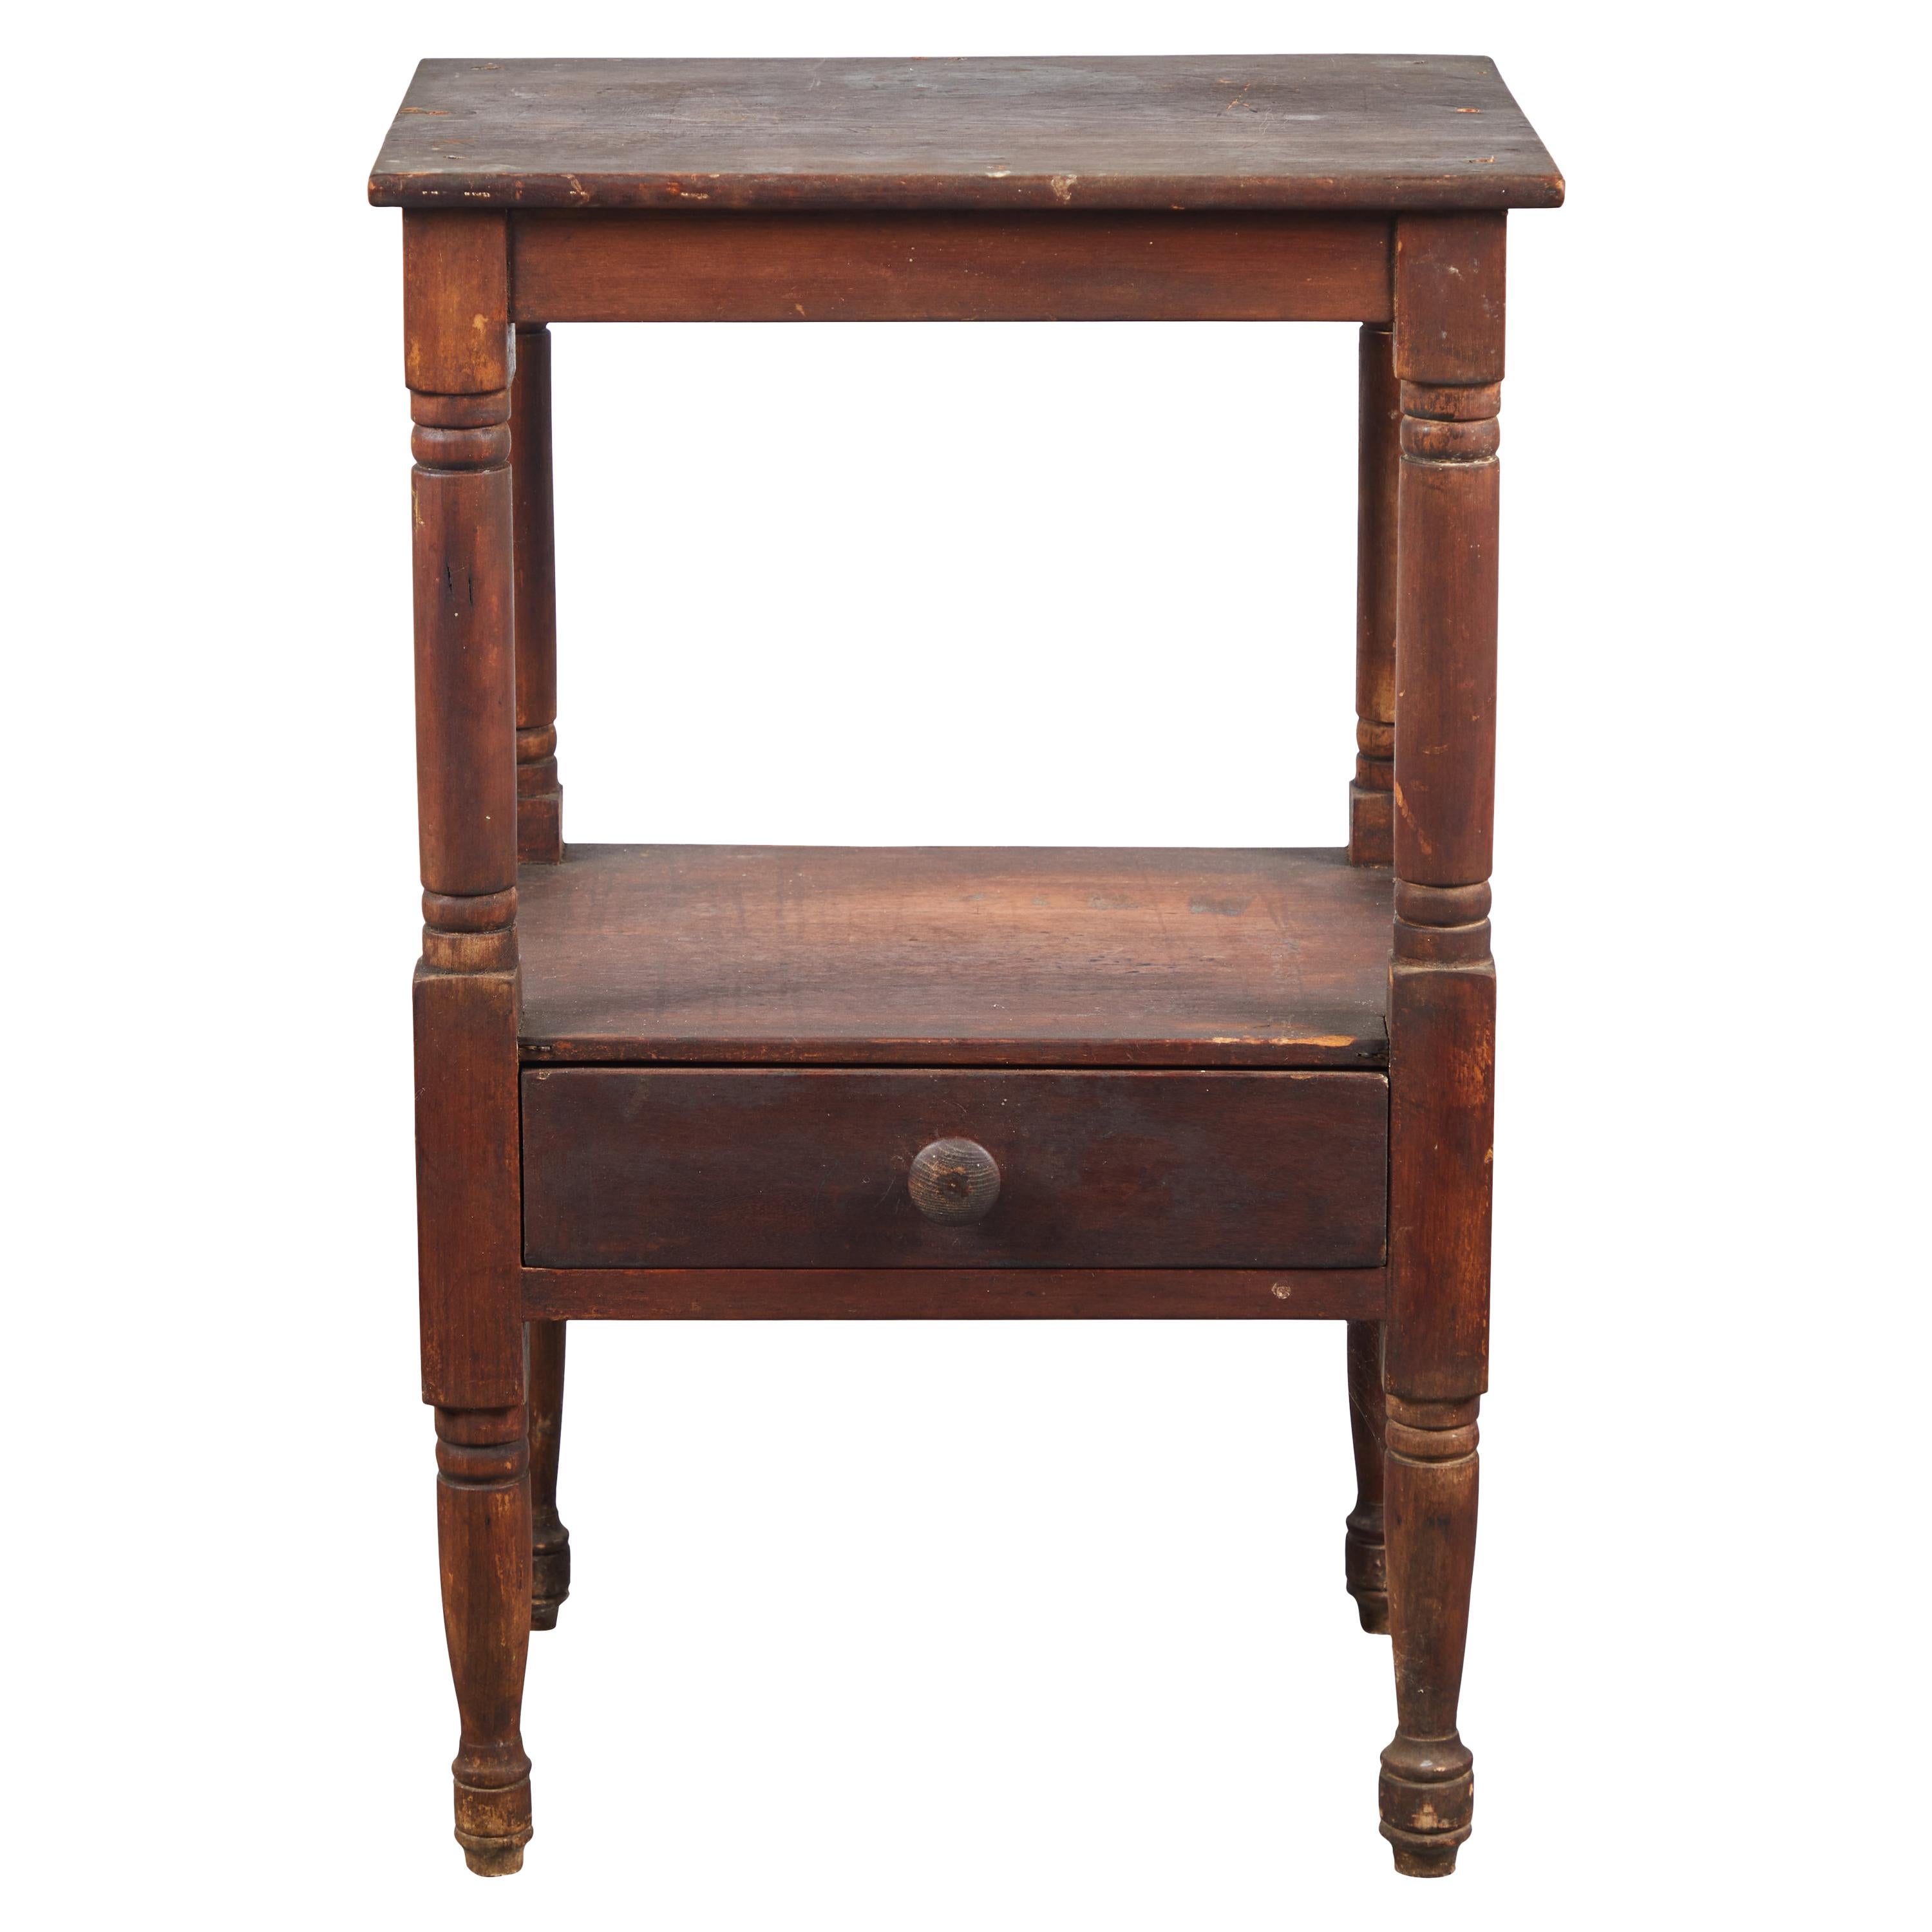 Early American Rustic Side Table